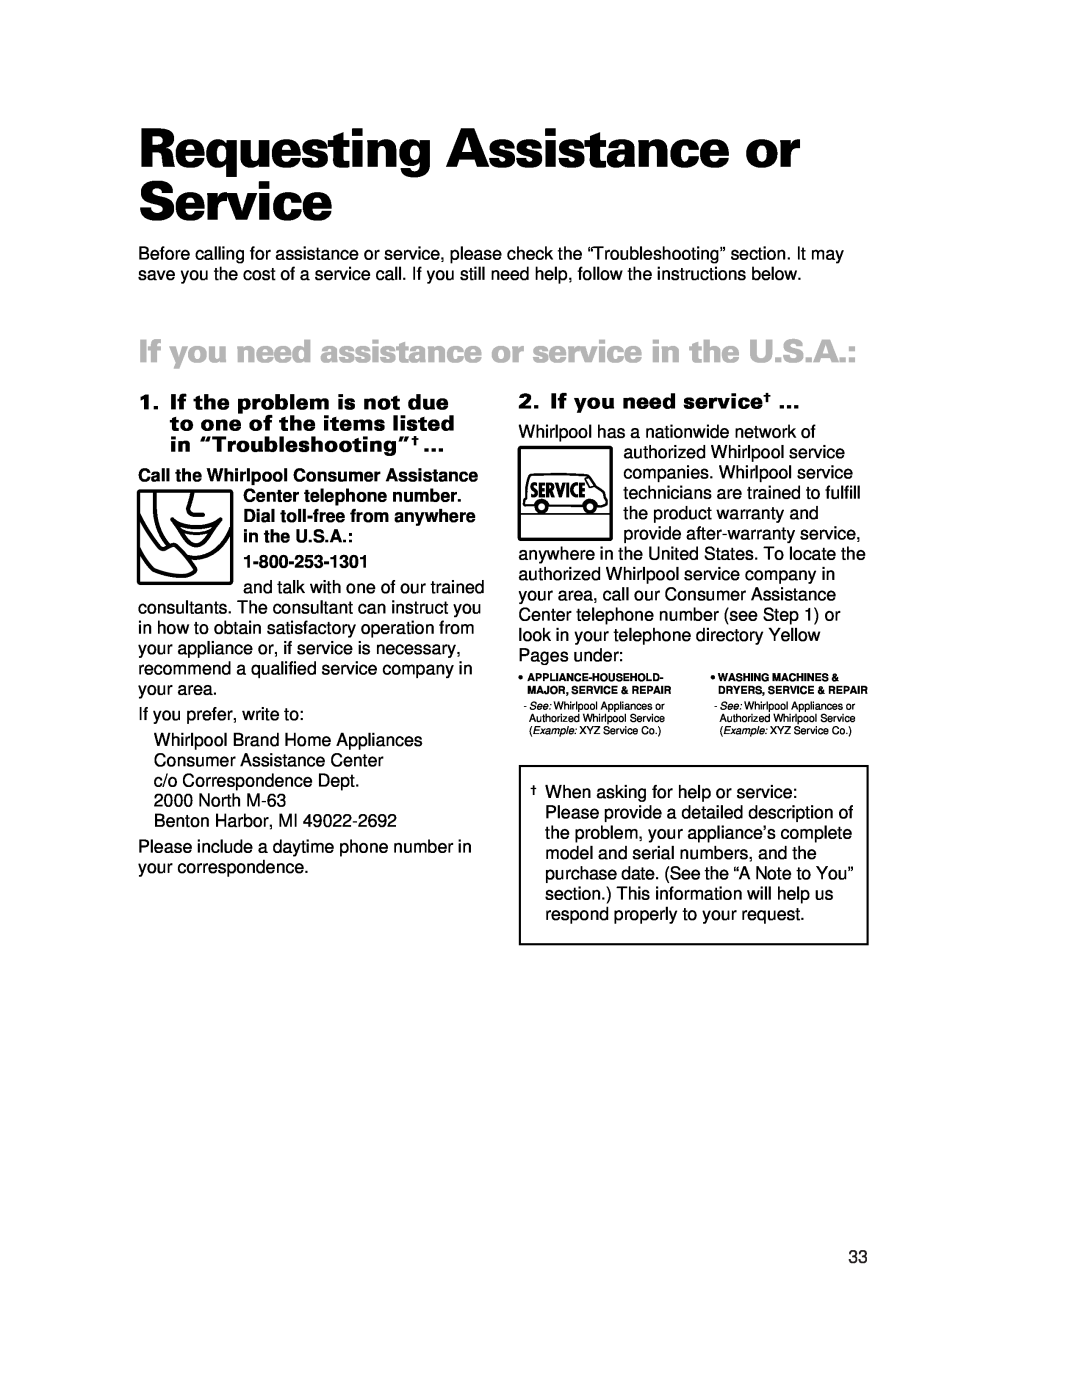 Whirlpool 929 Requesting Assistance or Service, If you need assistance or service in the U.S.A, If you need service† … 